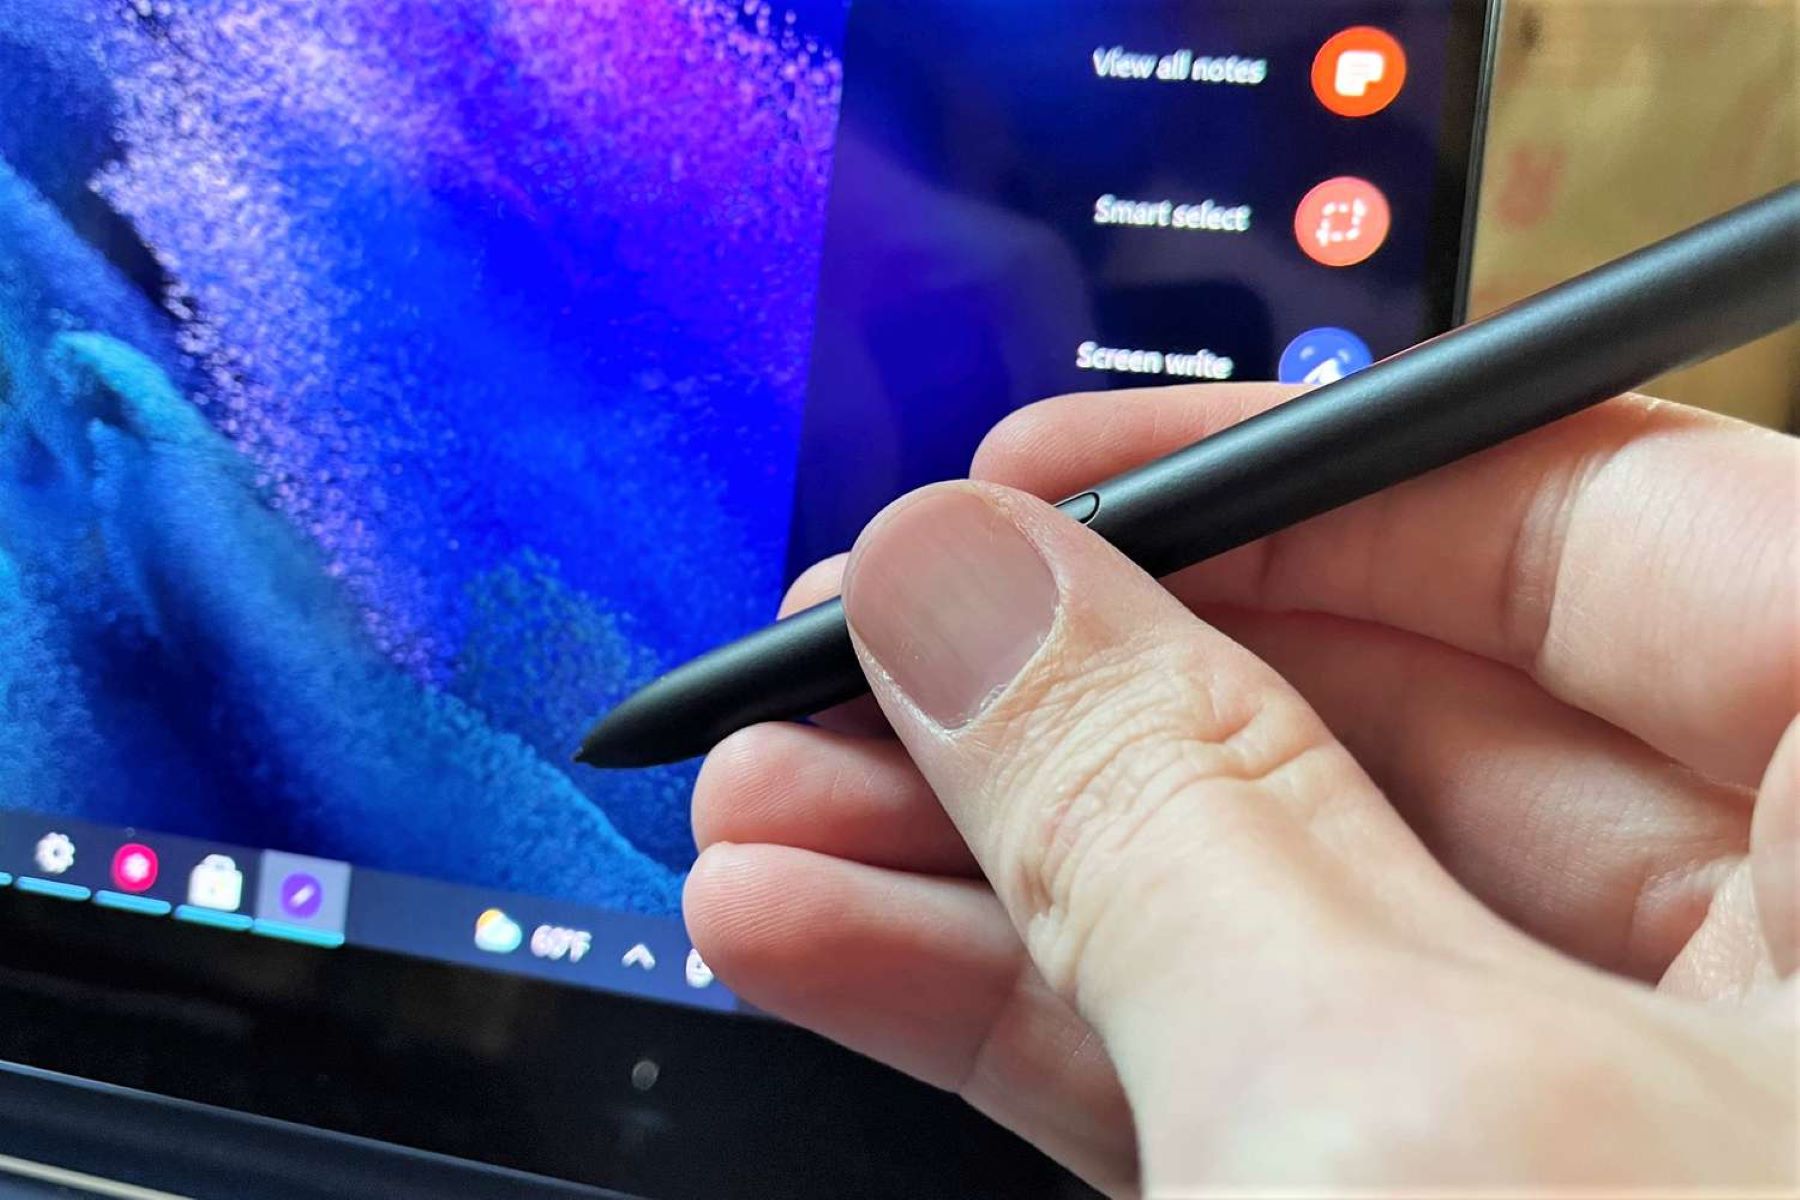 surface-pro-connection-setting-up-your-stylus-pen